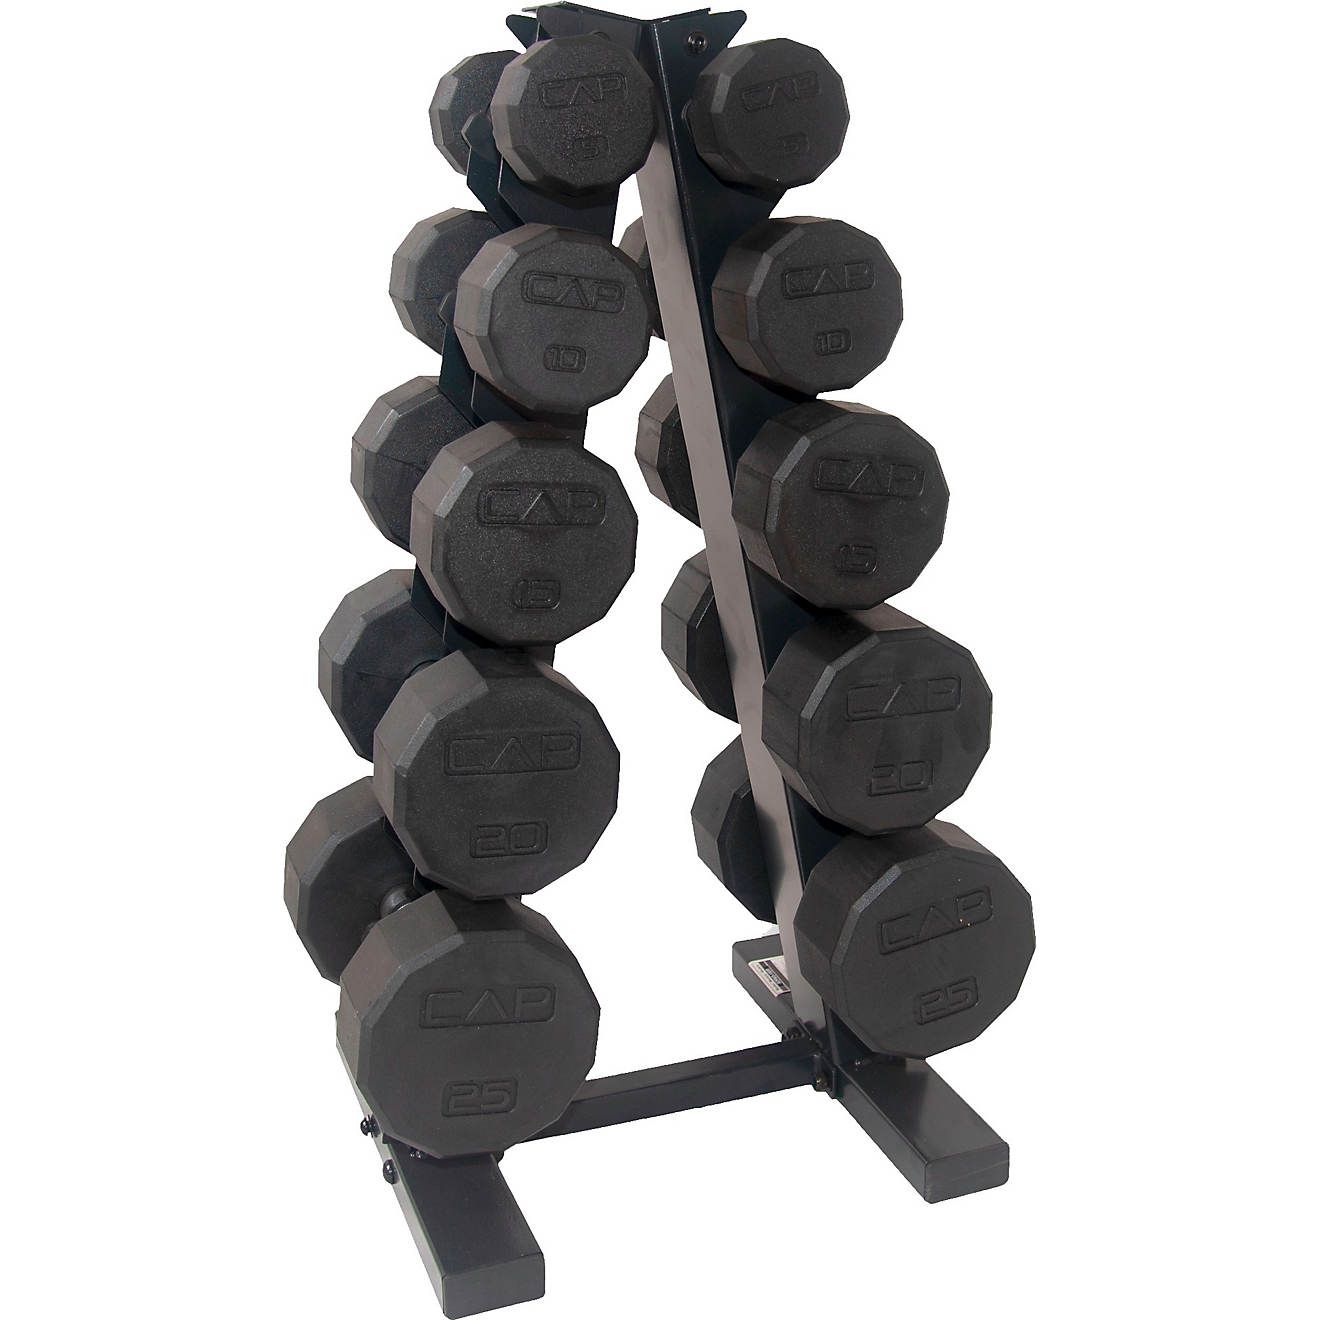 CAP 10-sided Coated Dumbbell Set with Storage Rack | Academy | Academy Sports + Outdoors